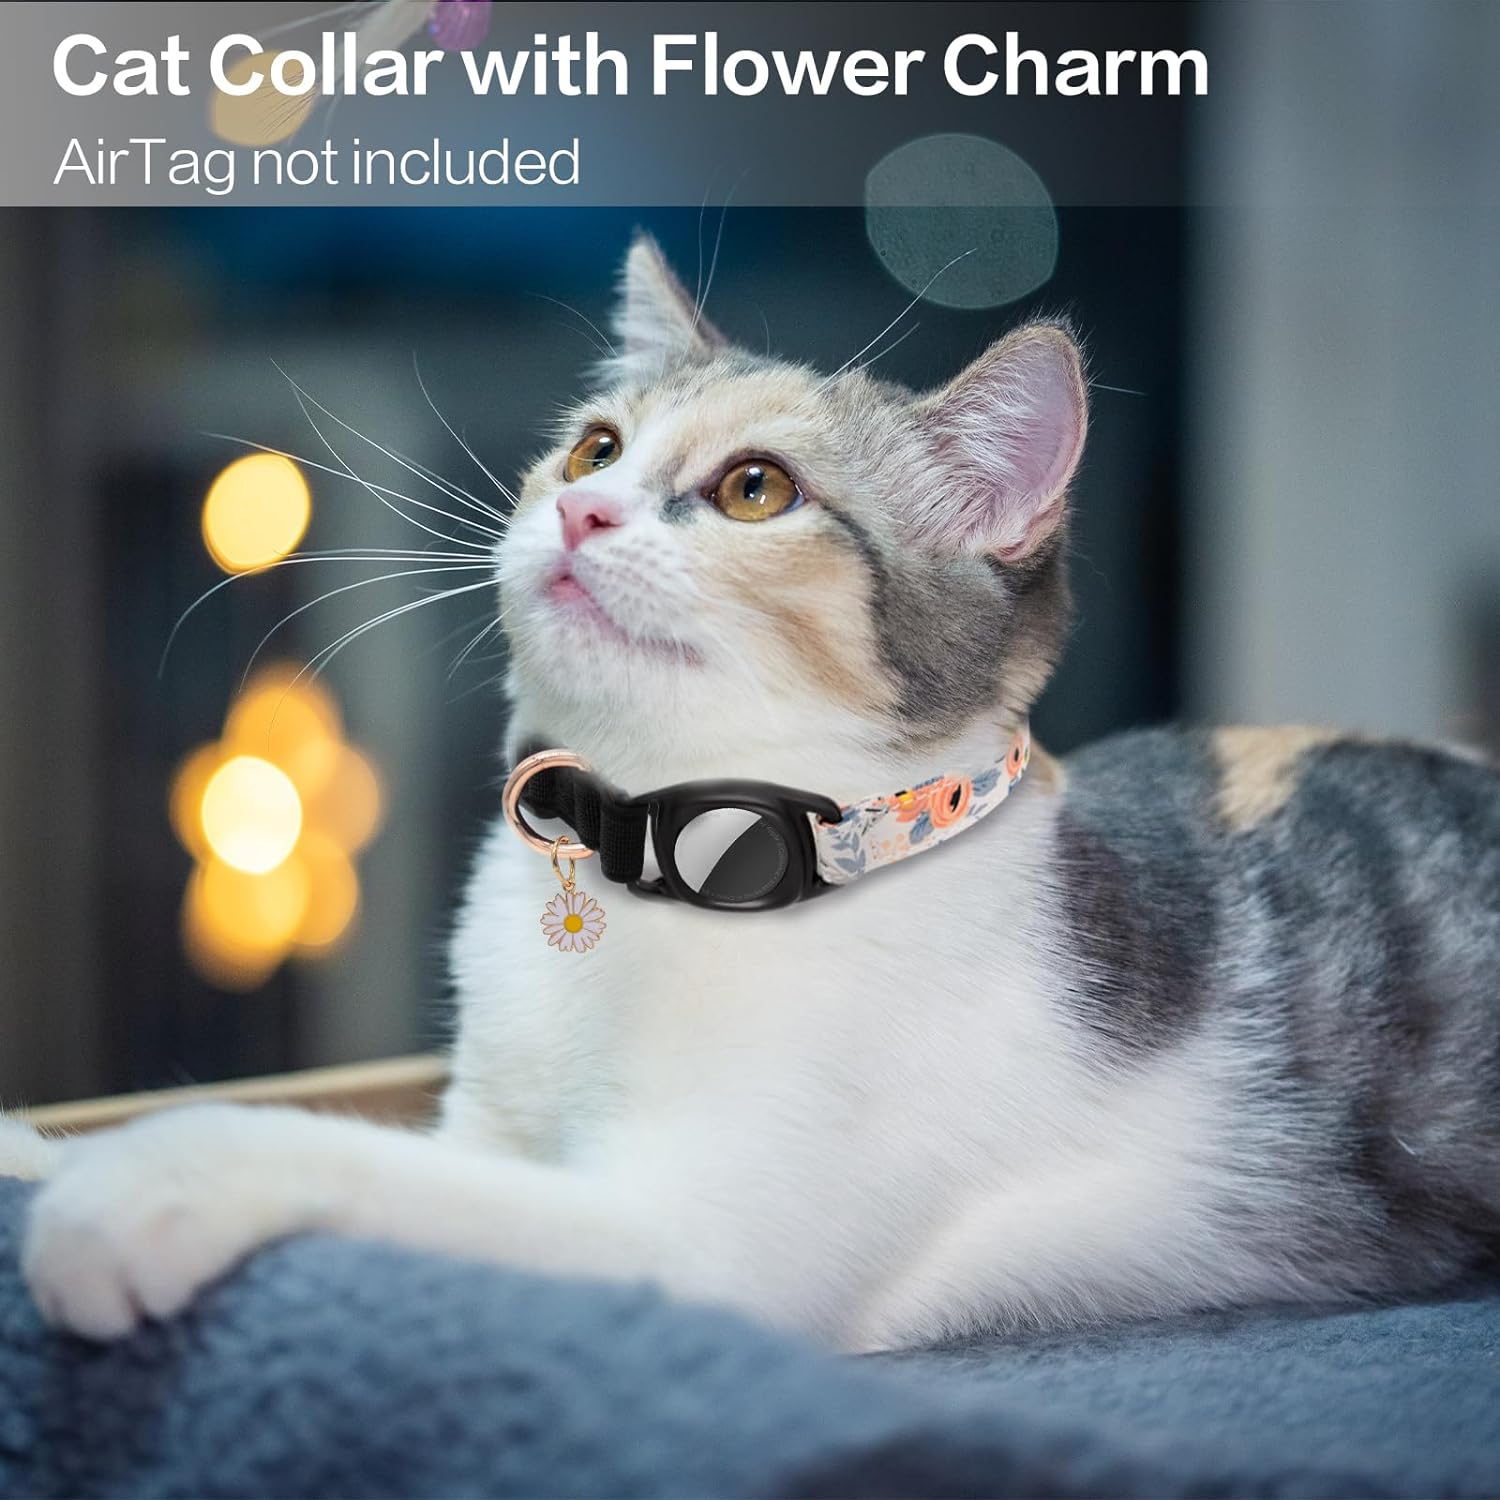 HSIGIO Airtag Cat Collar, GPS Cat Collar with Apple Air Tag Holder and Flower Charm, Floral Cat Tracker Collar in 0.6 Inches Width for Girl Boy Cats, Kittens and Puppies(Orange Flower, 7.4-9inch)